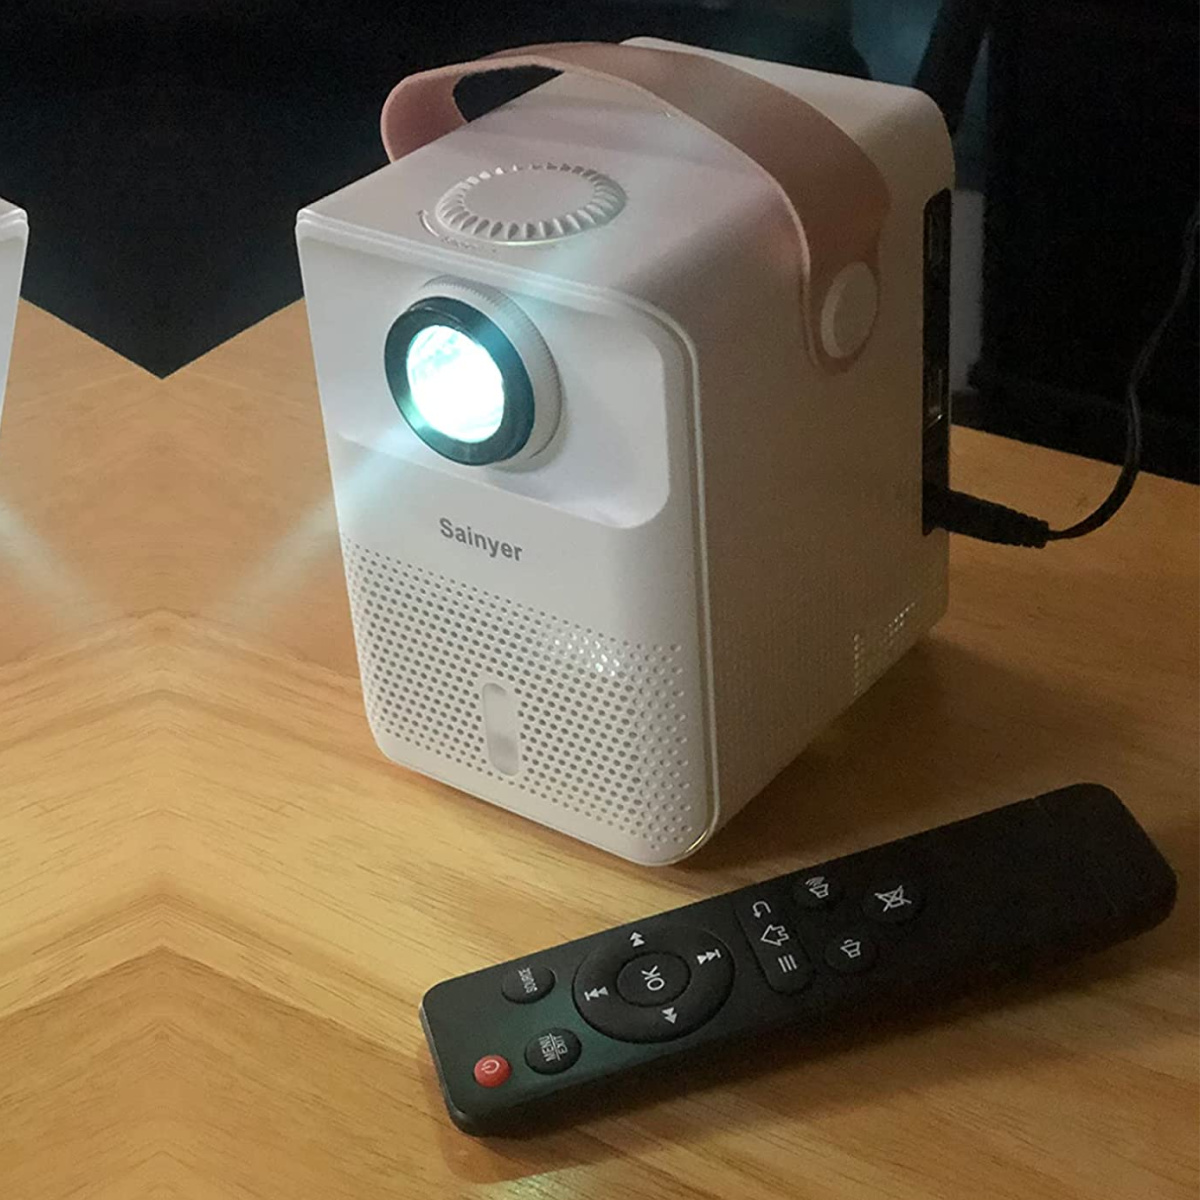 Mini Portable Projector Just $67.93 Shipped on Amazon (Comes w/ Pre-Installed Apps Including Netflix!)